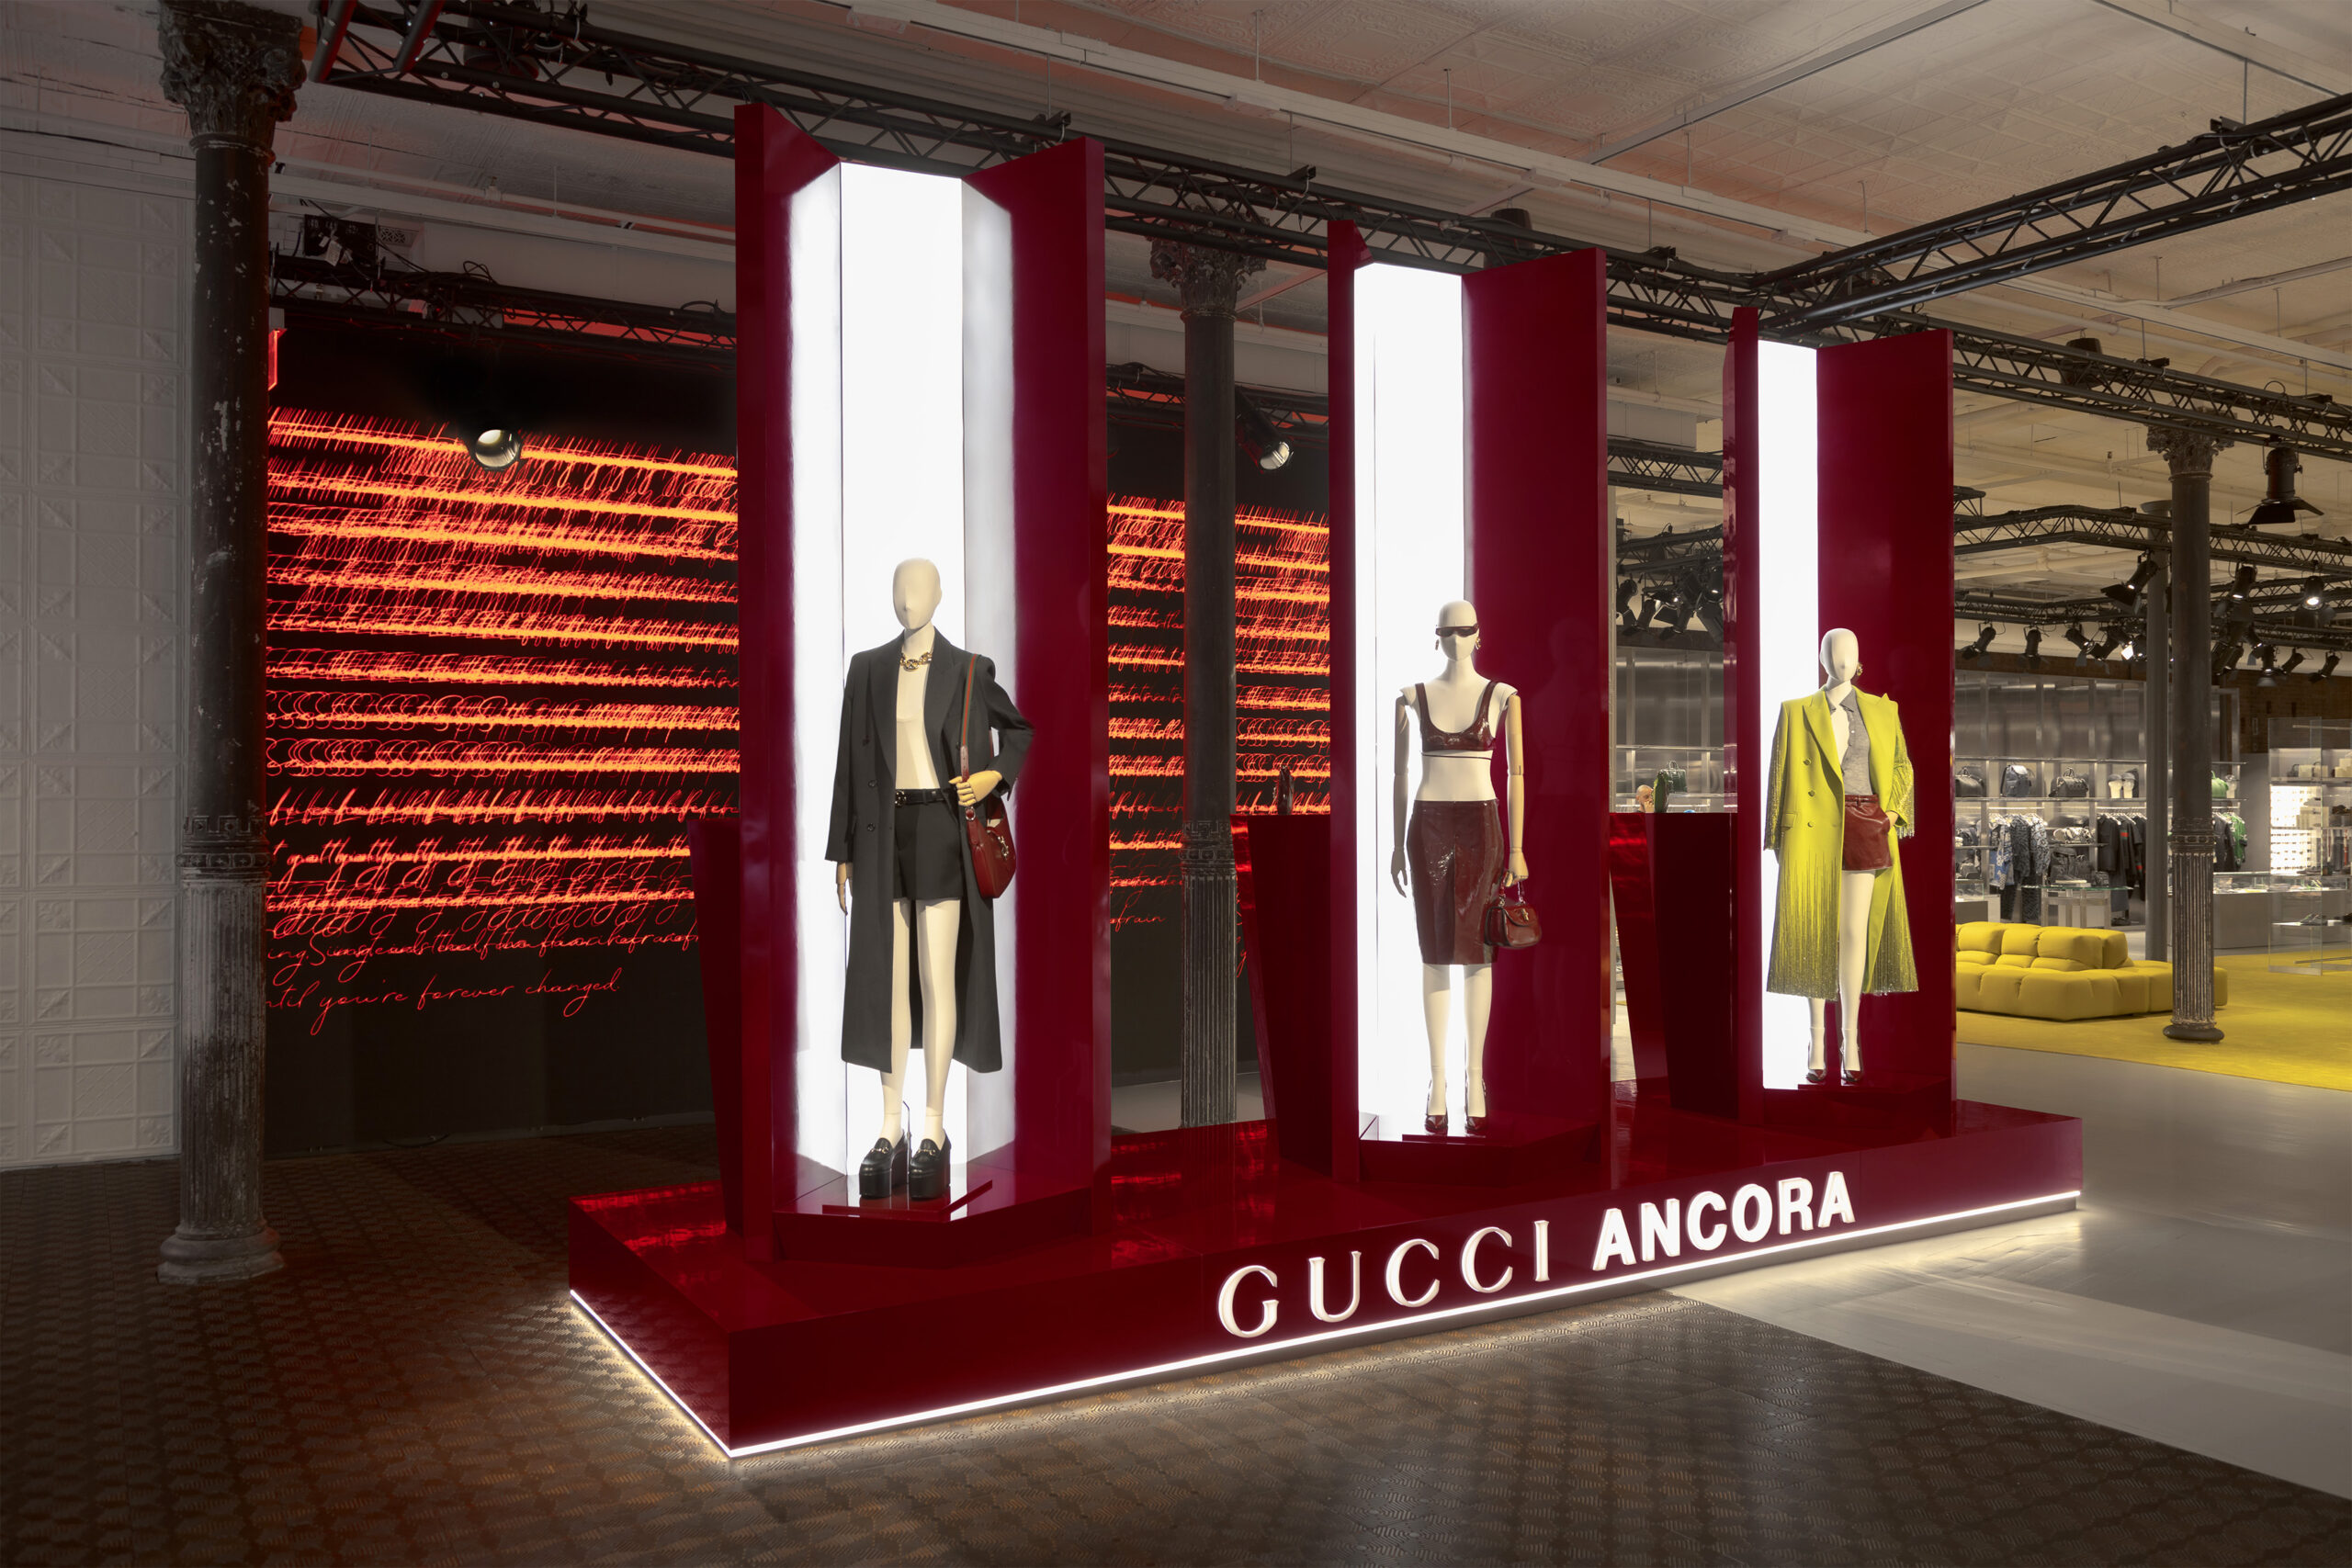 An elegant display inside the Gucci Wooster boutique featuring three mannequins showcasing the latest fashion designs against a backdrop of vibrant red hues and artistic lighting. The display is highlighted by the illuminated 'GUCCI ANCORA' sign at the base.